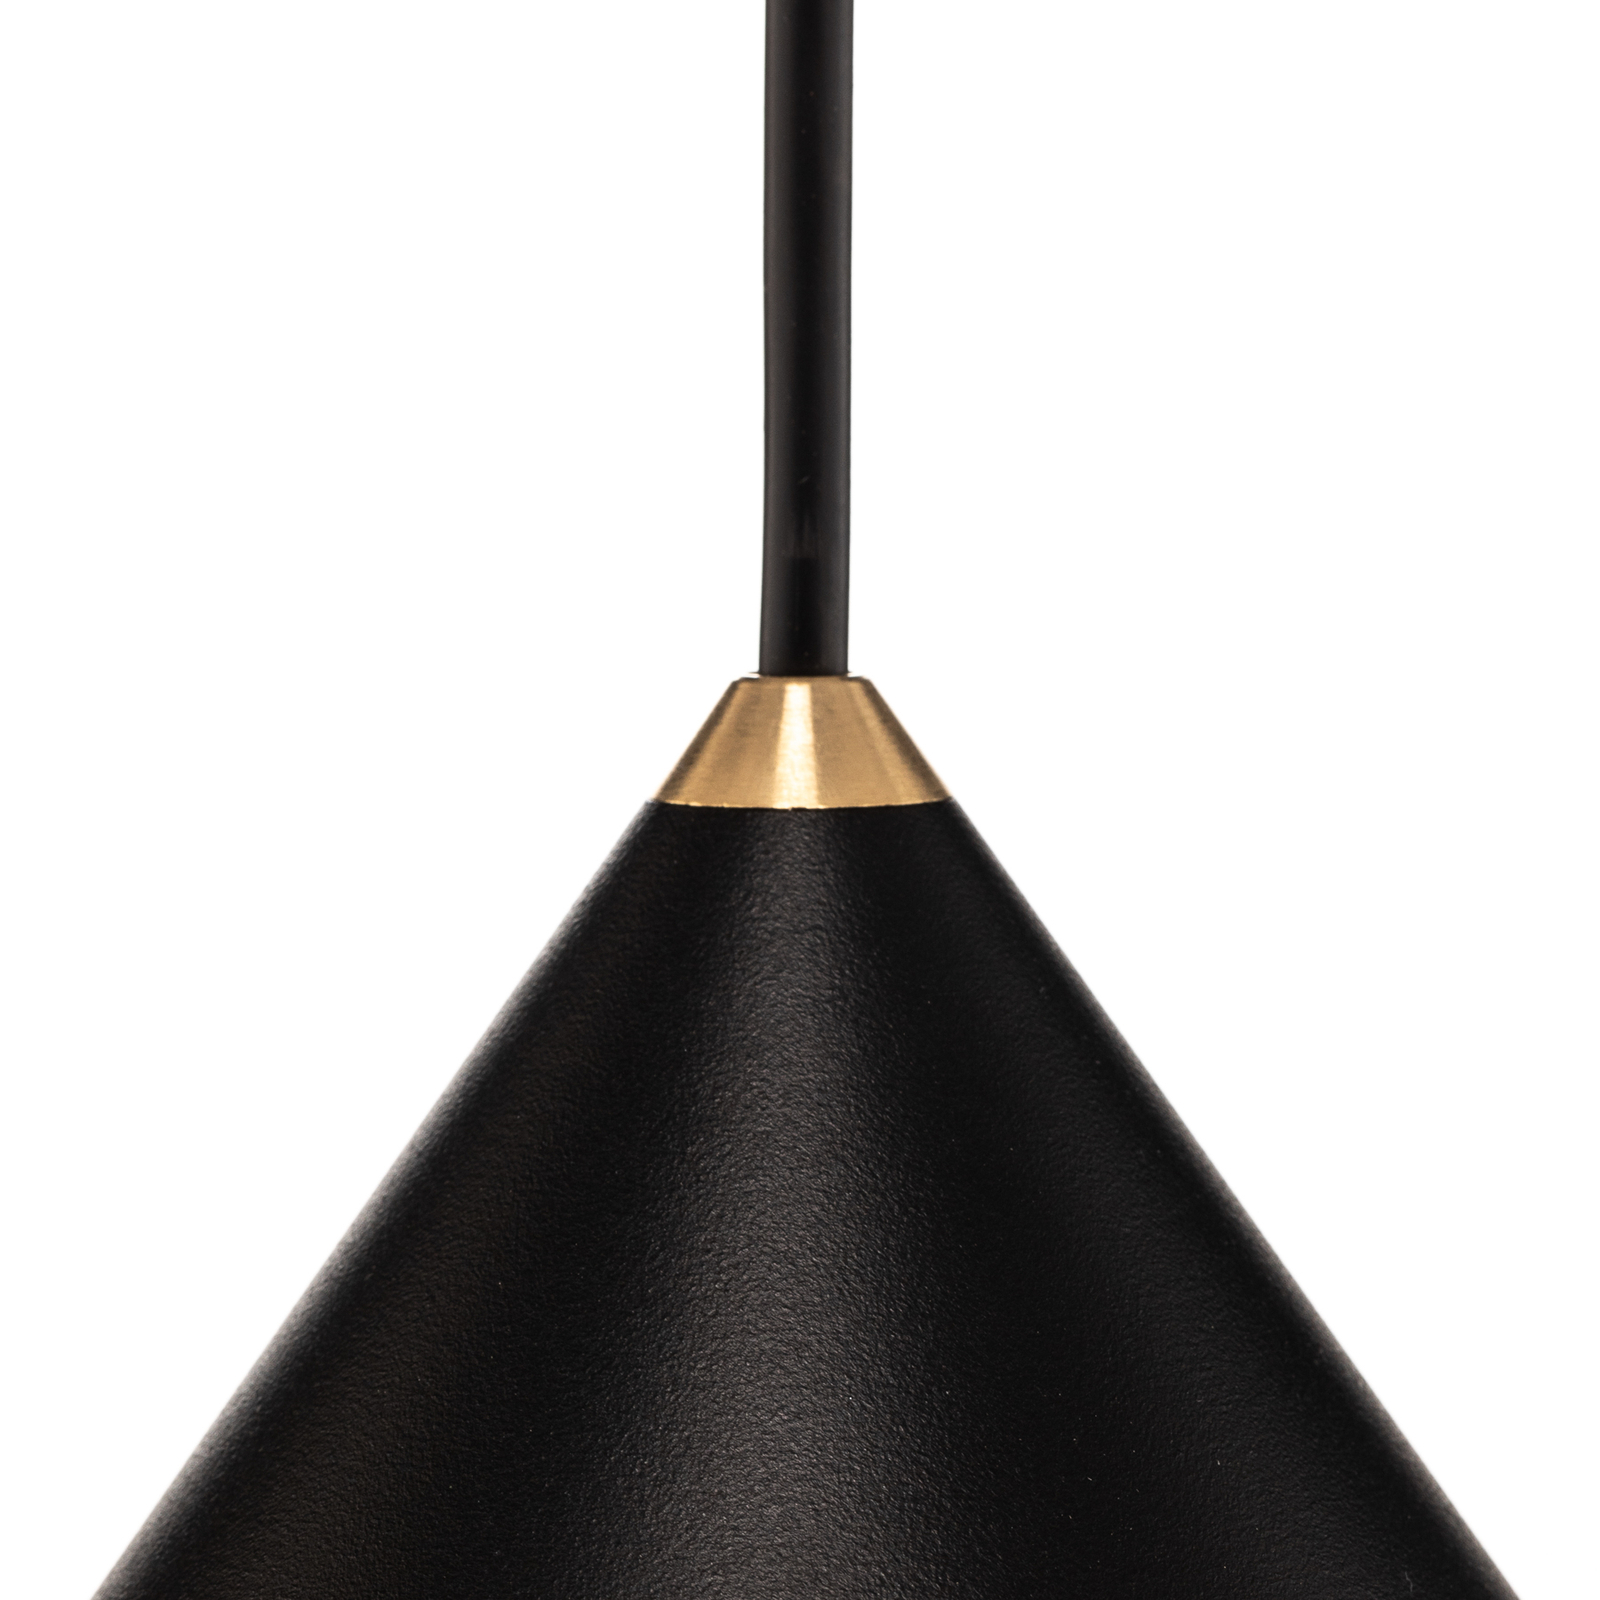 Zenith S pendant light with metal shade in black